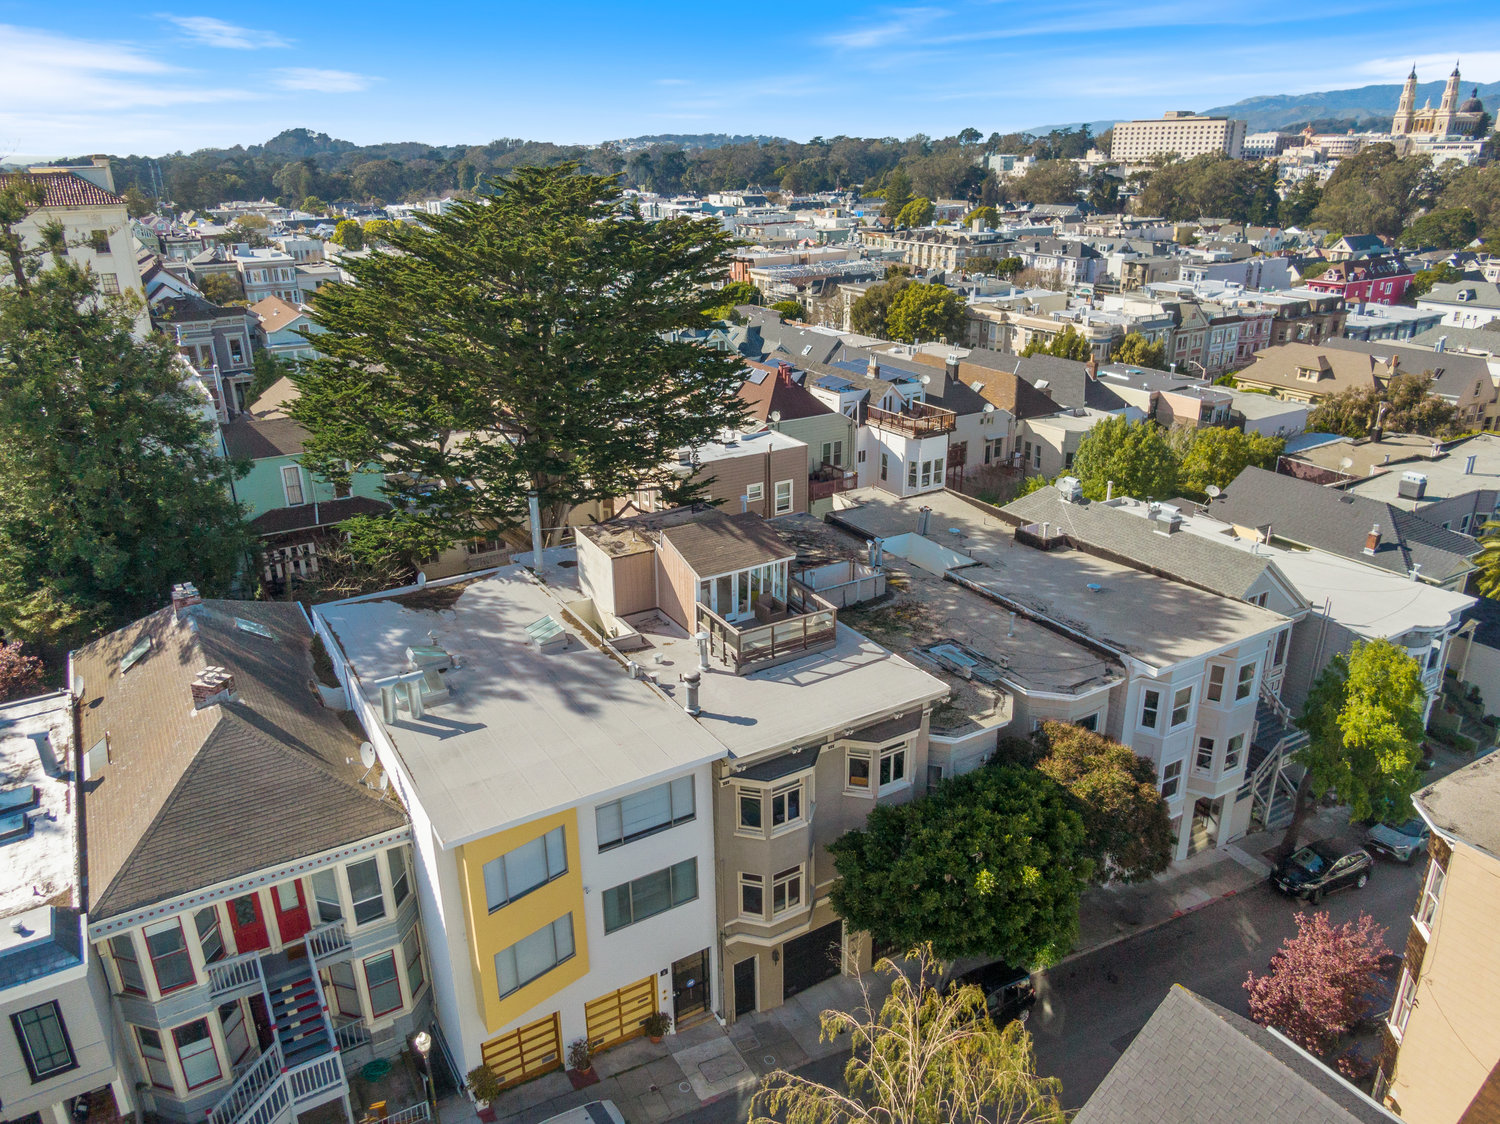 Property Photo: Aerial photo looking at 41 Delmar and Cole Valley